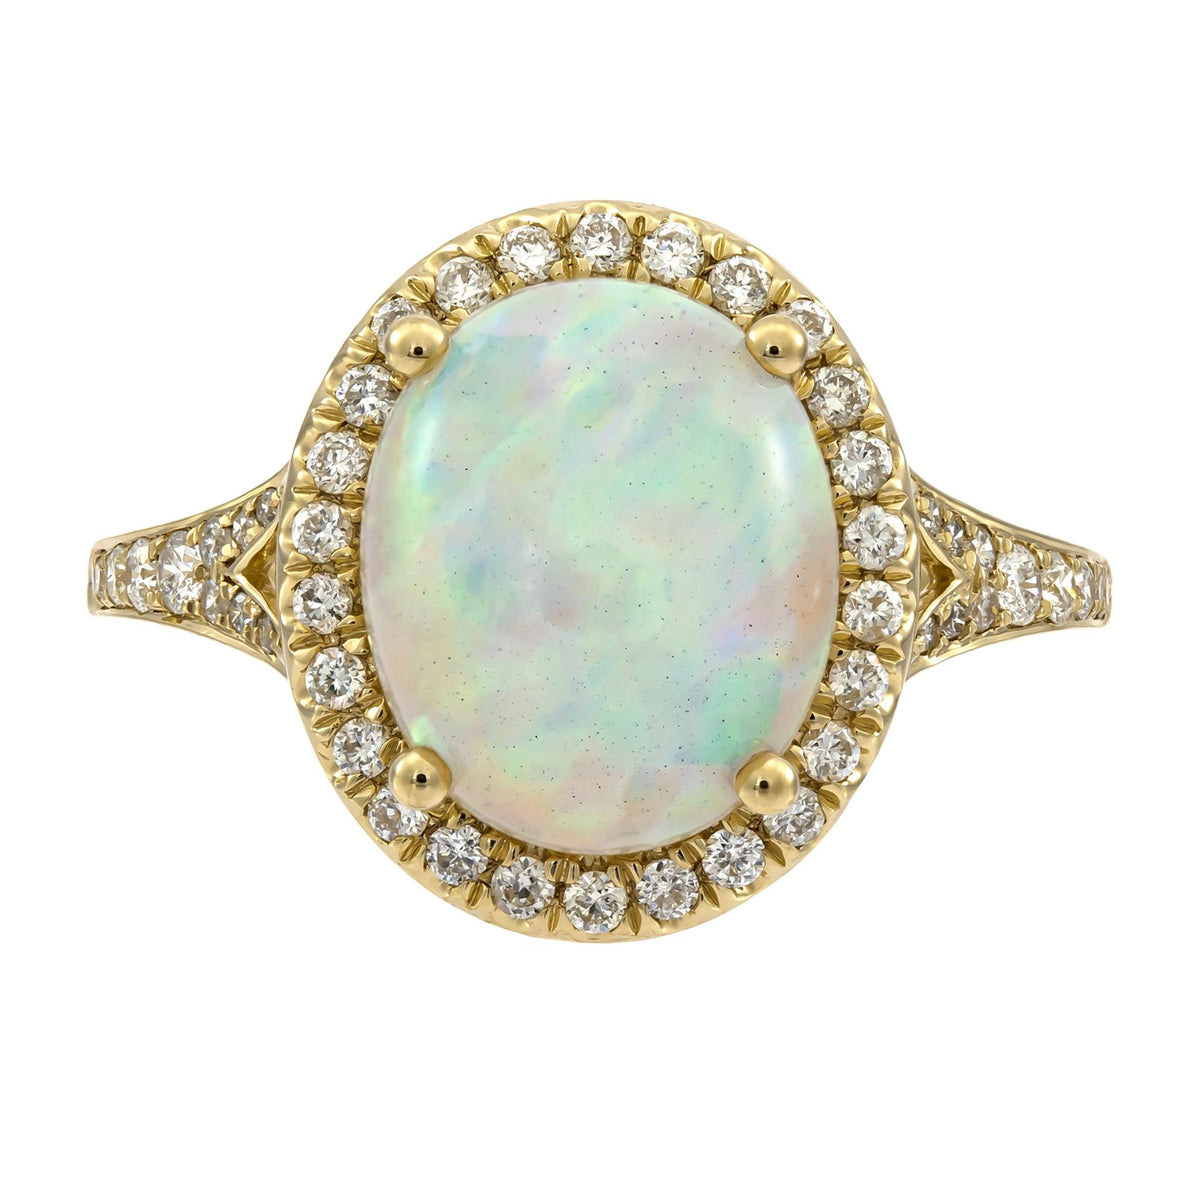 14Kt Yellow Gold Halo Gemstone Ring With 2.18ct Ethiopian Opal